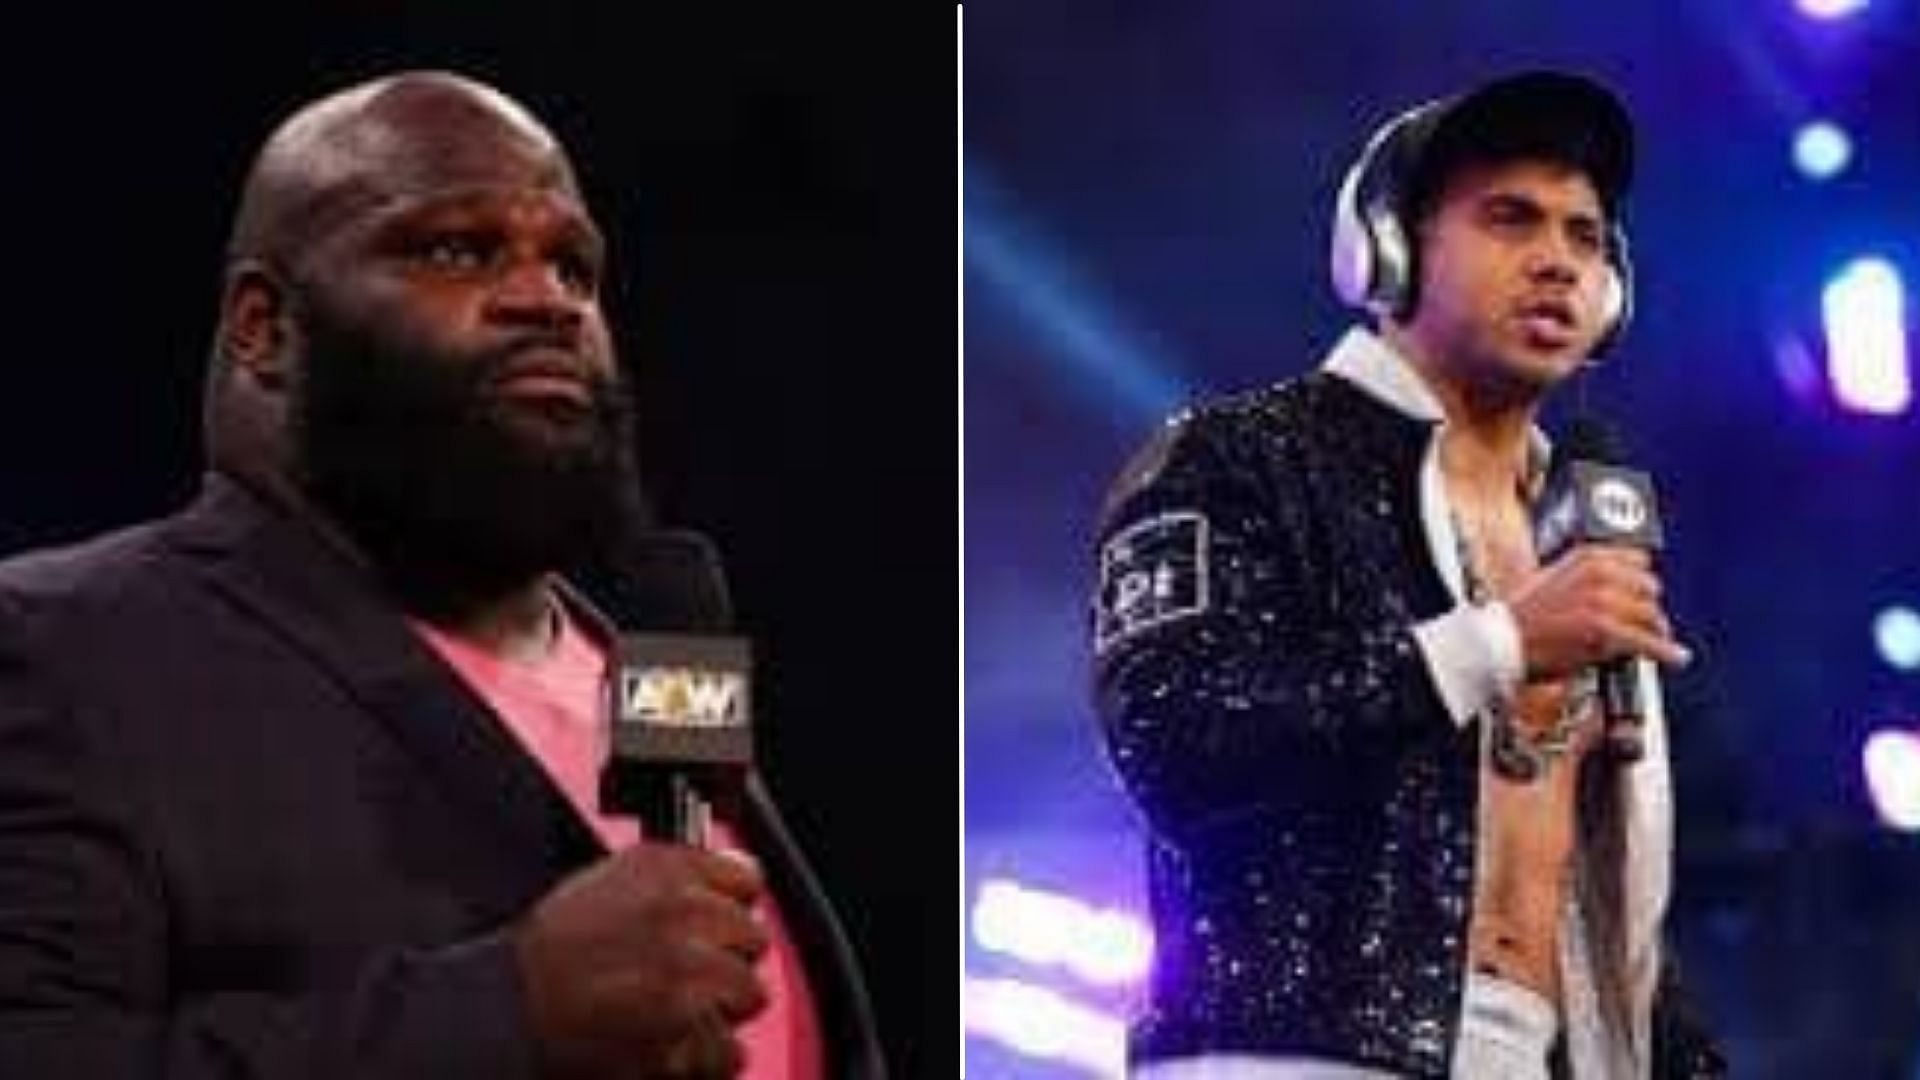 Mark Henry revealed an upcoming project in an interview